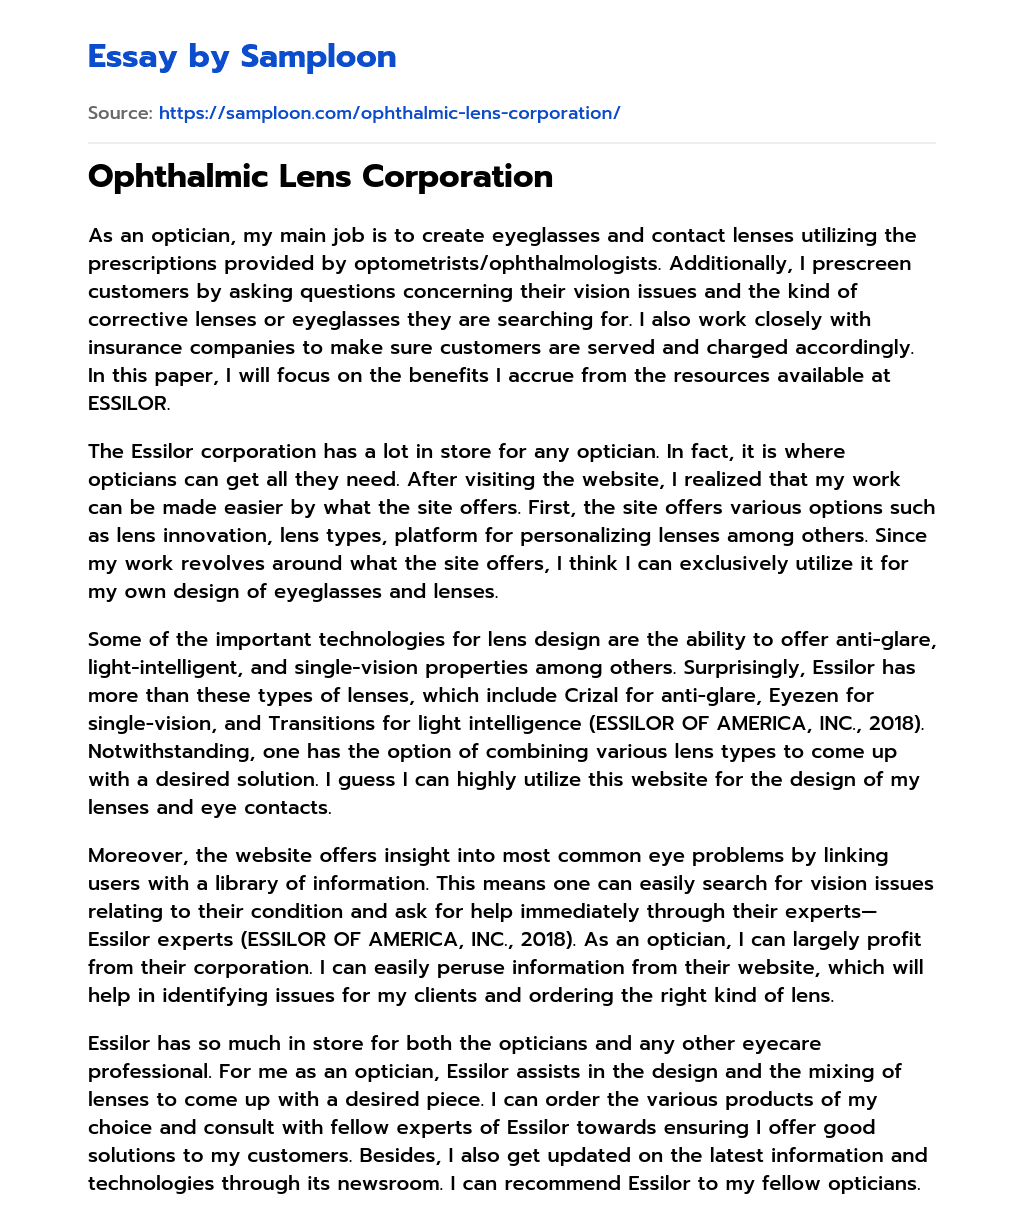 Ophthalmic Lens Corporation essay